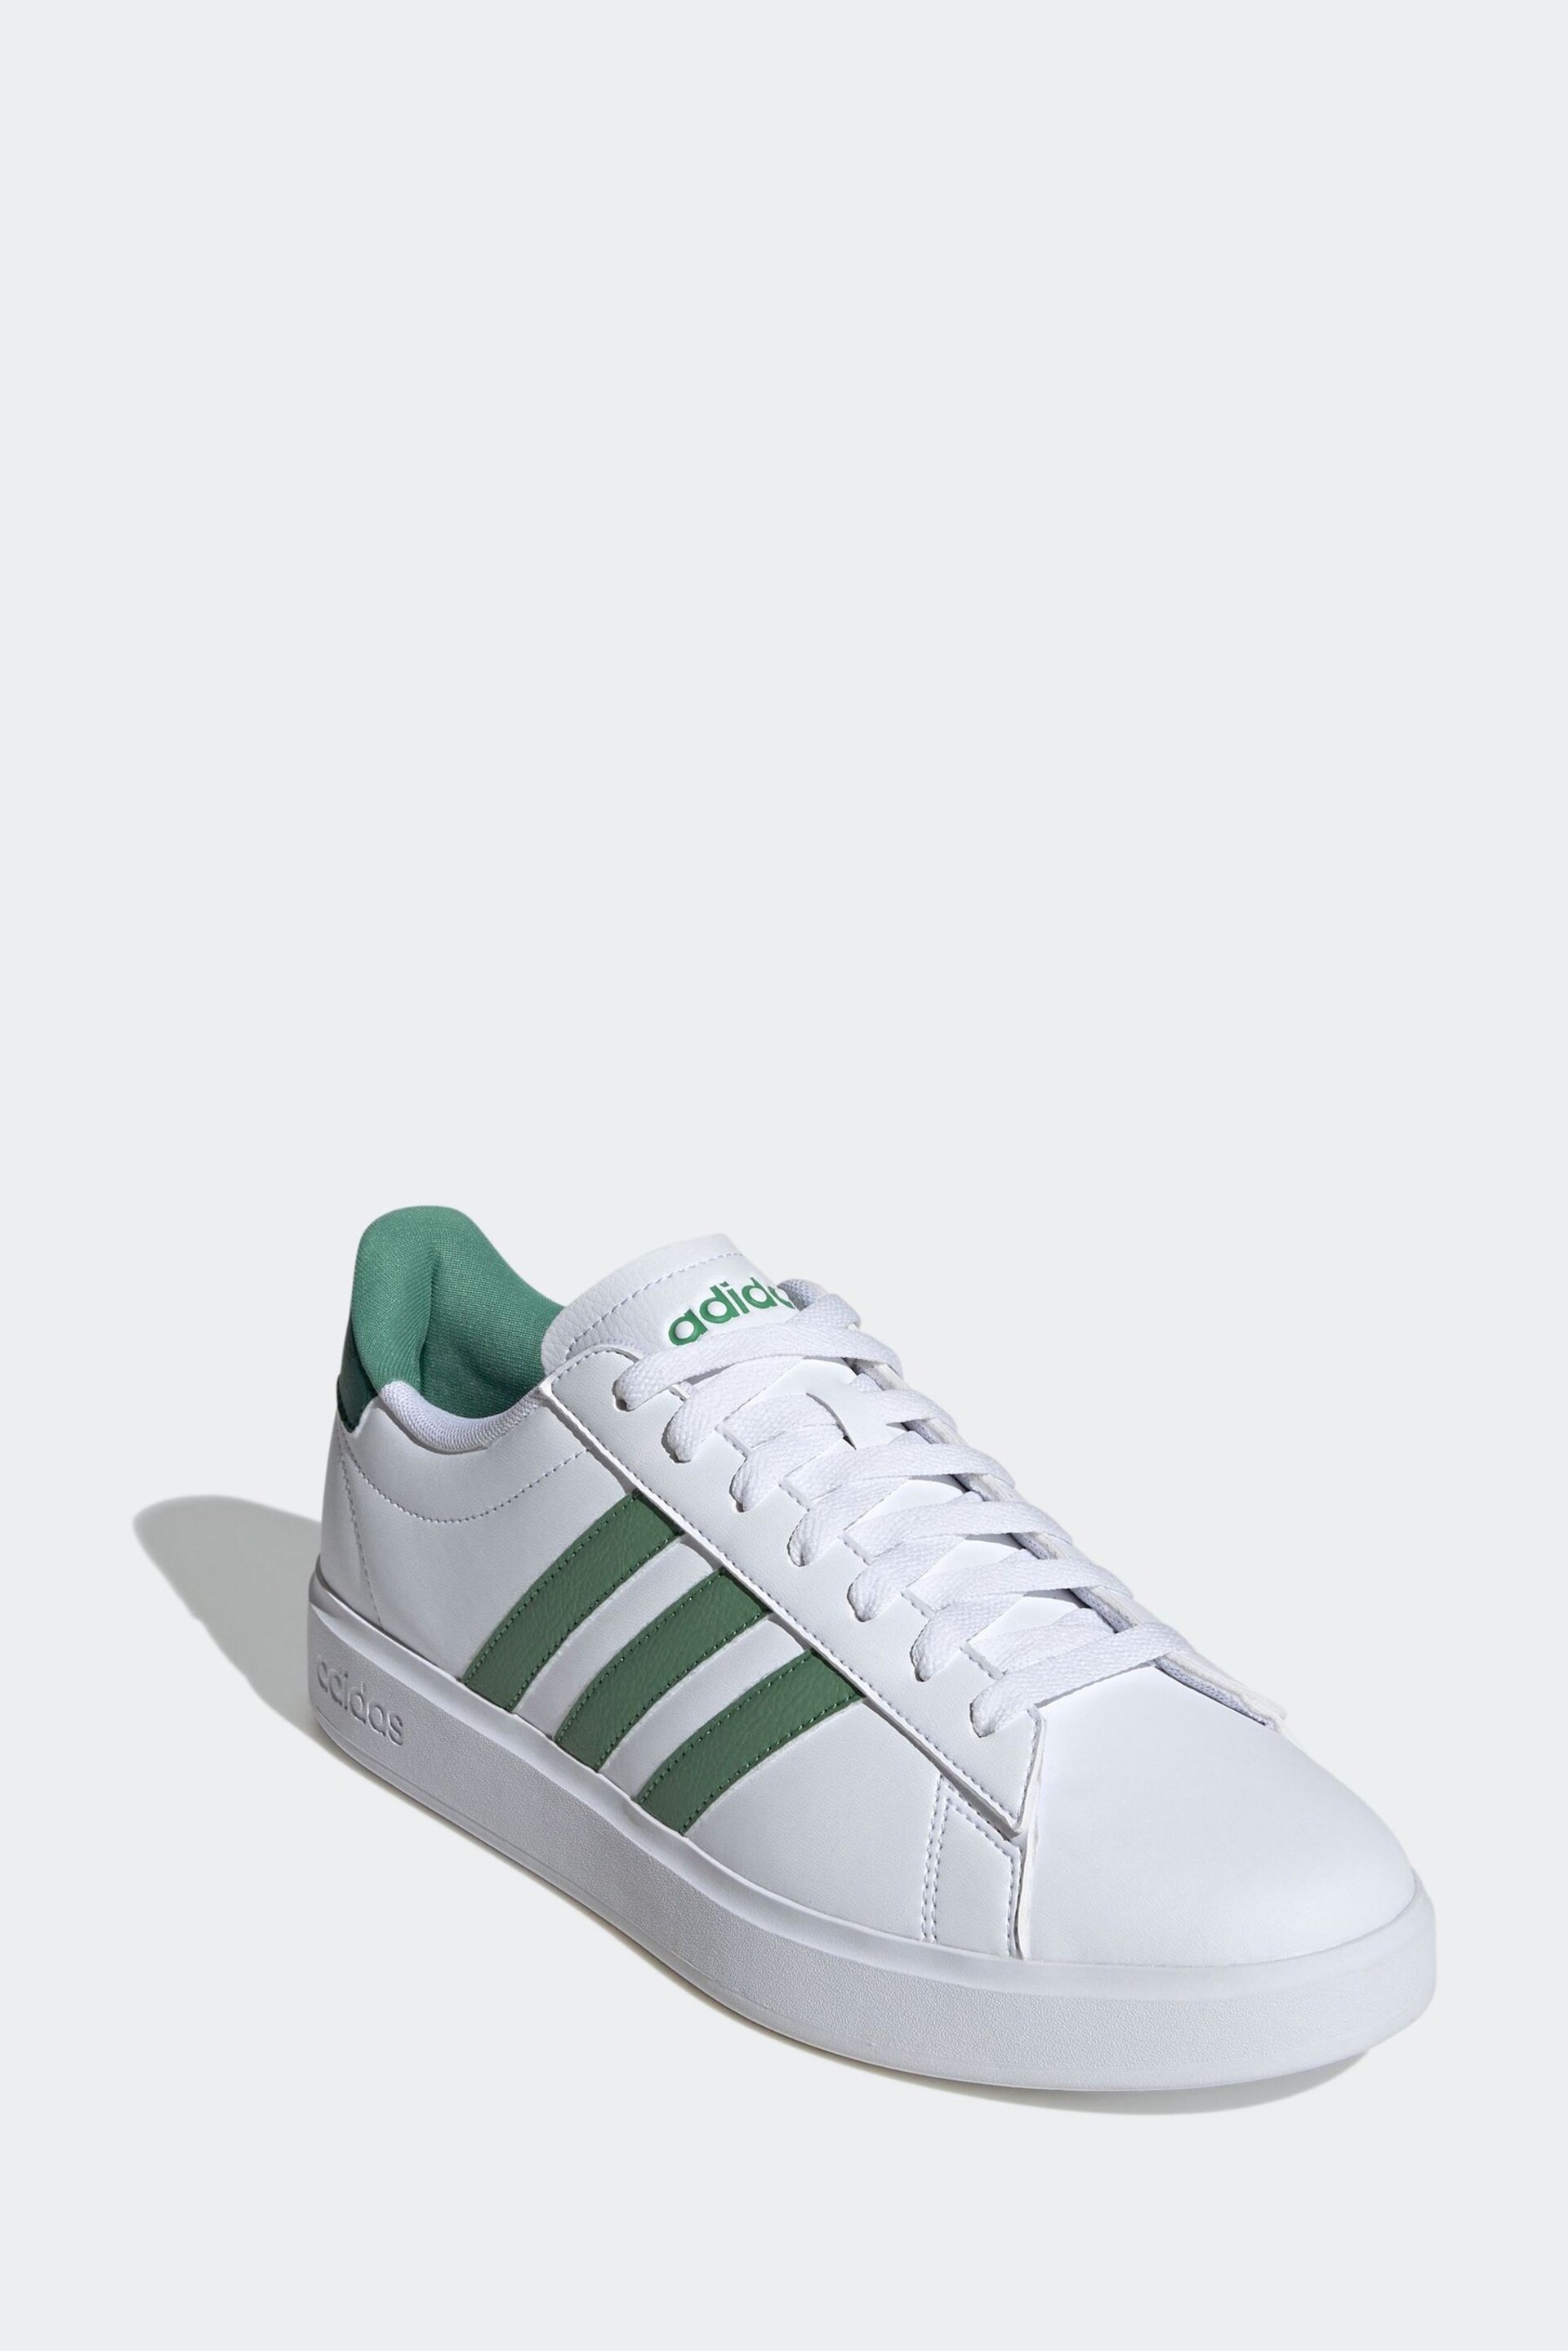 adidas Green White Sportswear Grand Court 2.0 Trainers - Image 2 of 7